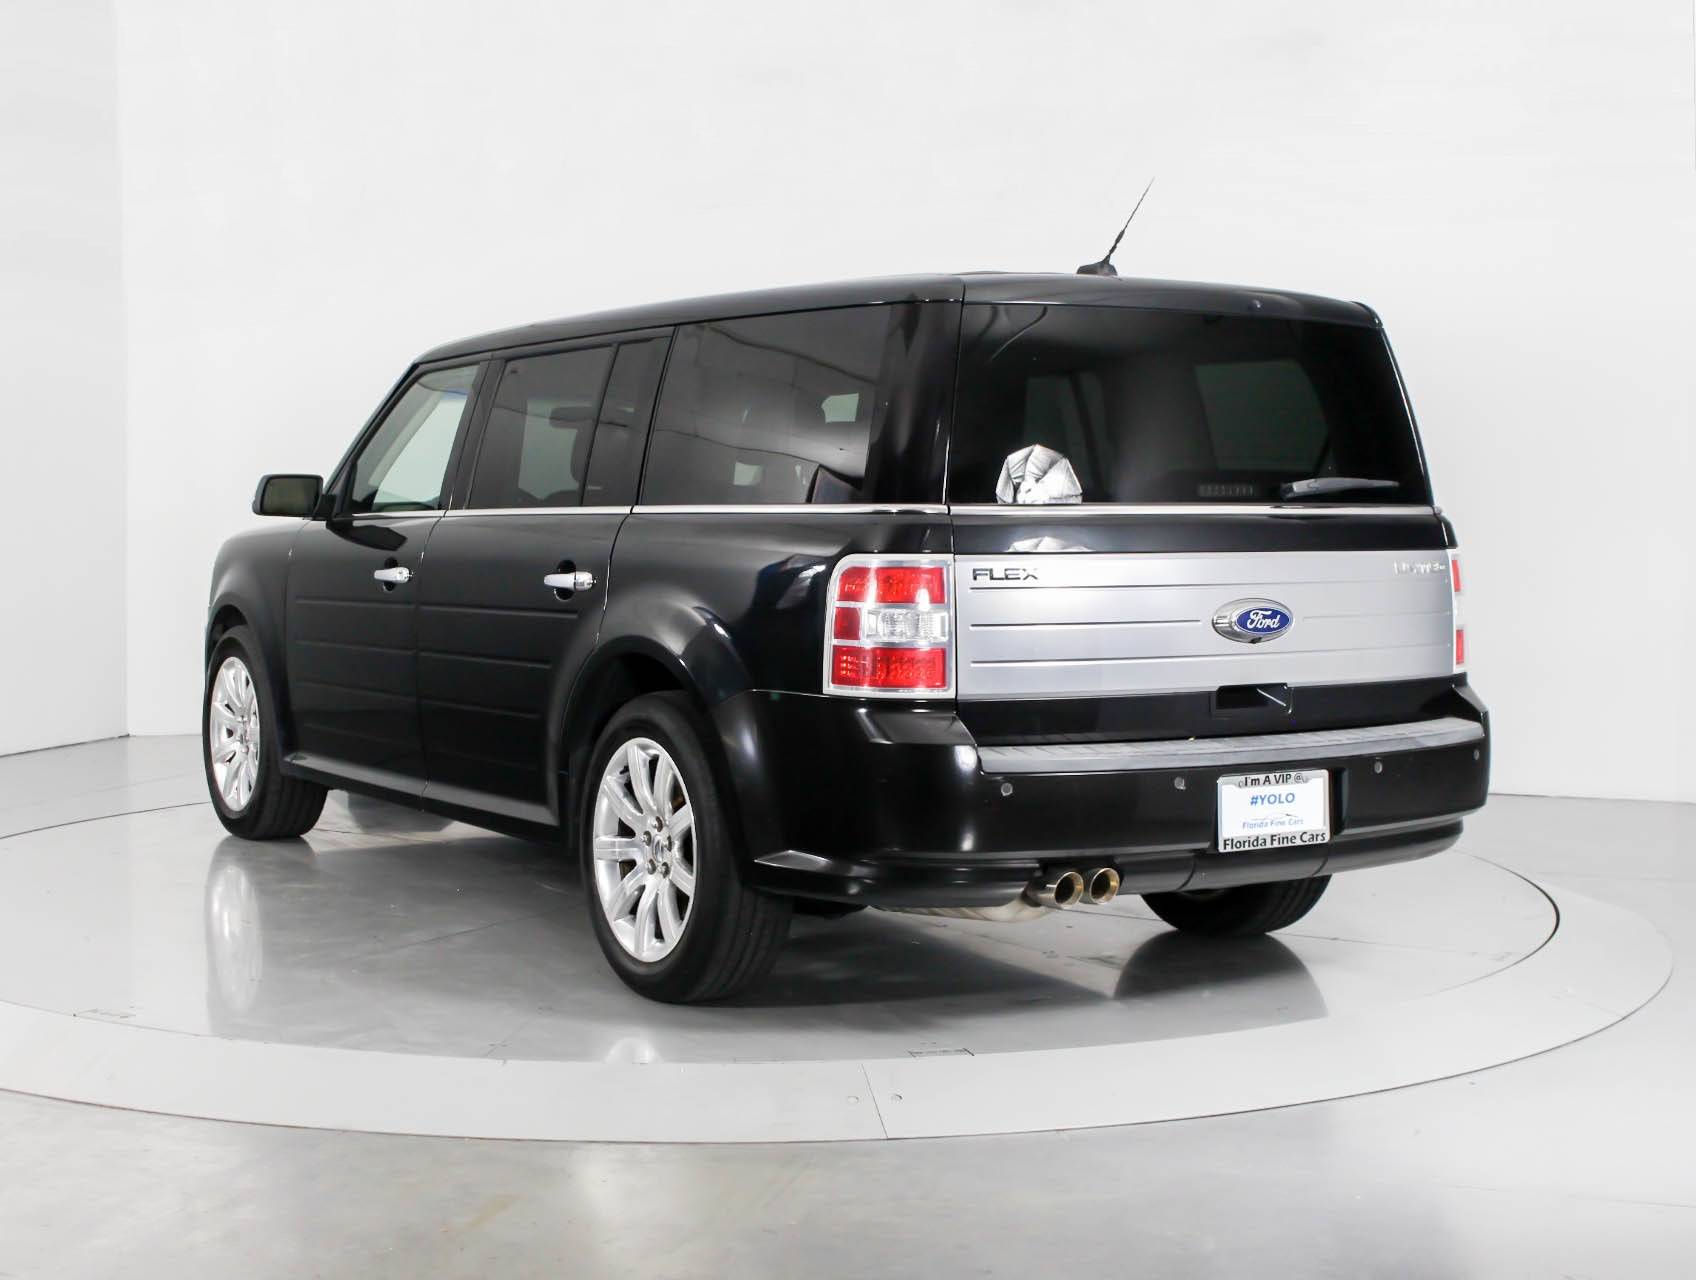 Used 2011 FORD FLEX LIMITED for sale in WEST PALM | 93040